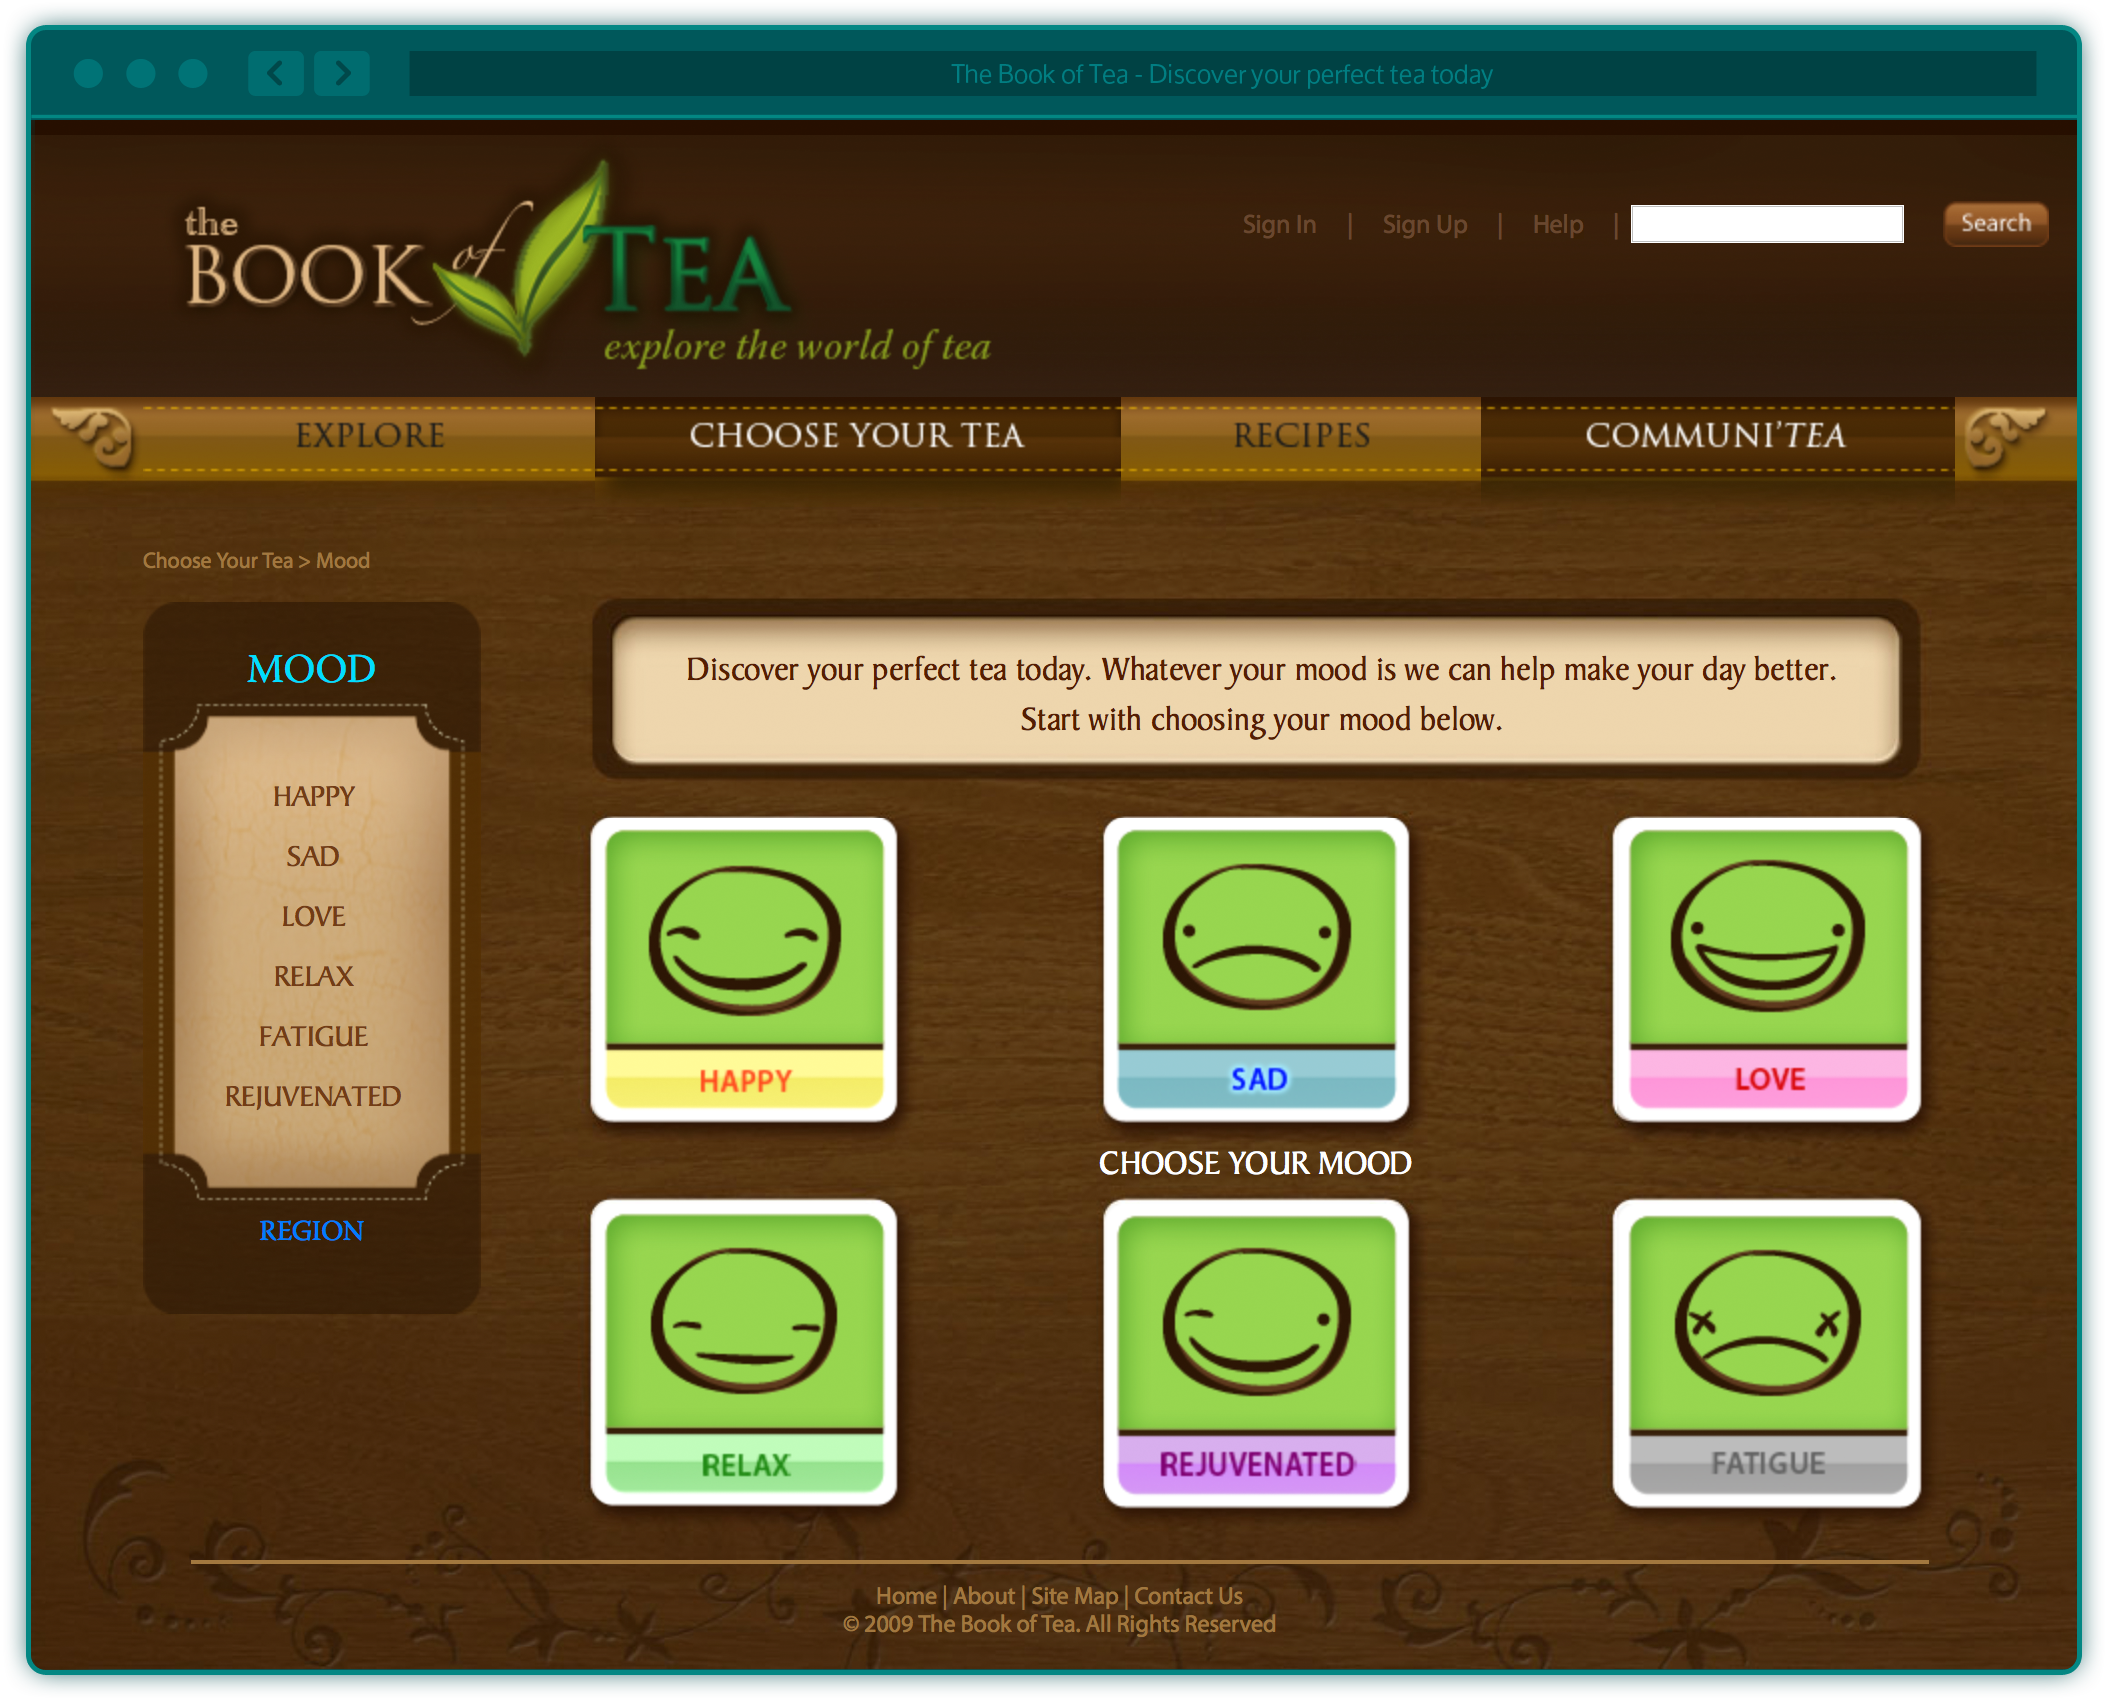 The Book of Tea website - tea for your mood